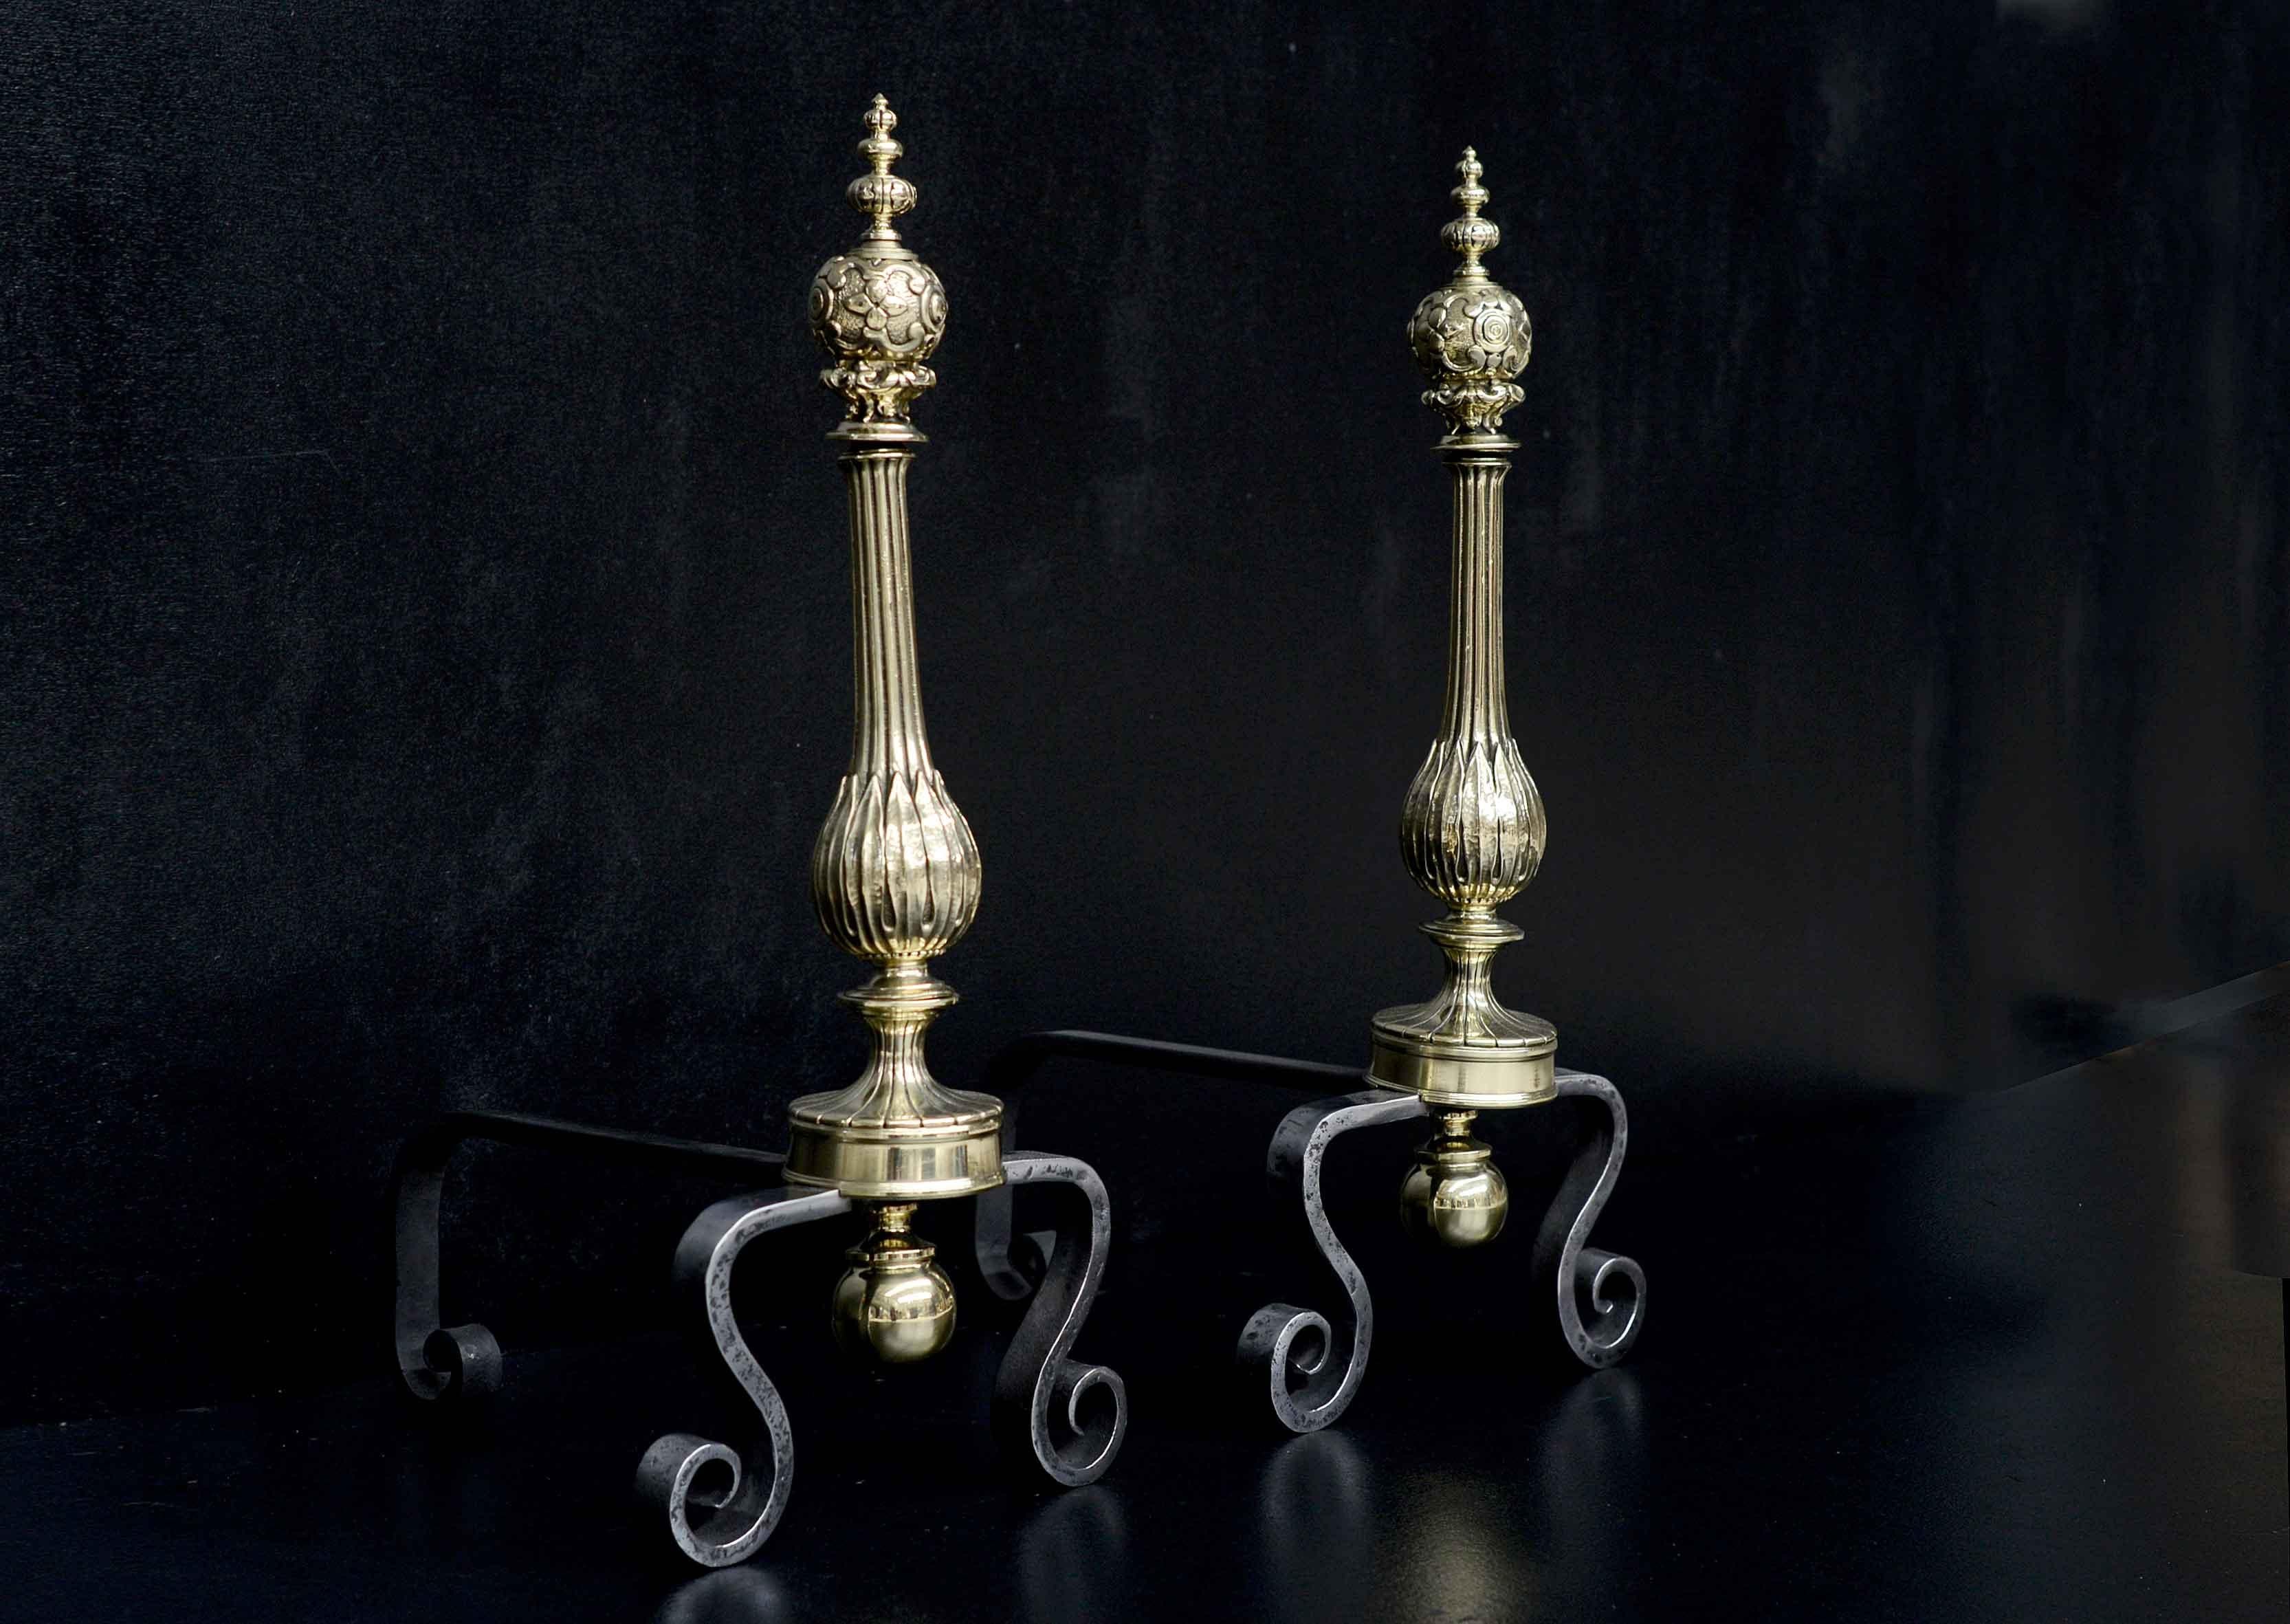 A pair of polished brass firedogs. The shaped shafts surmounted by cast tops and gadrooned finials. The scrolled feet in polished wrought iron. 19th century.

Measures: Height: 570 mm 22 ½